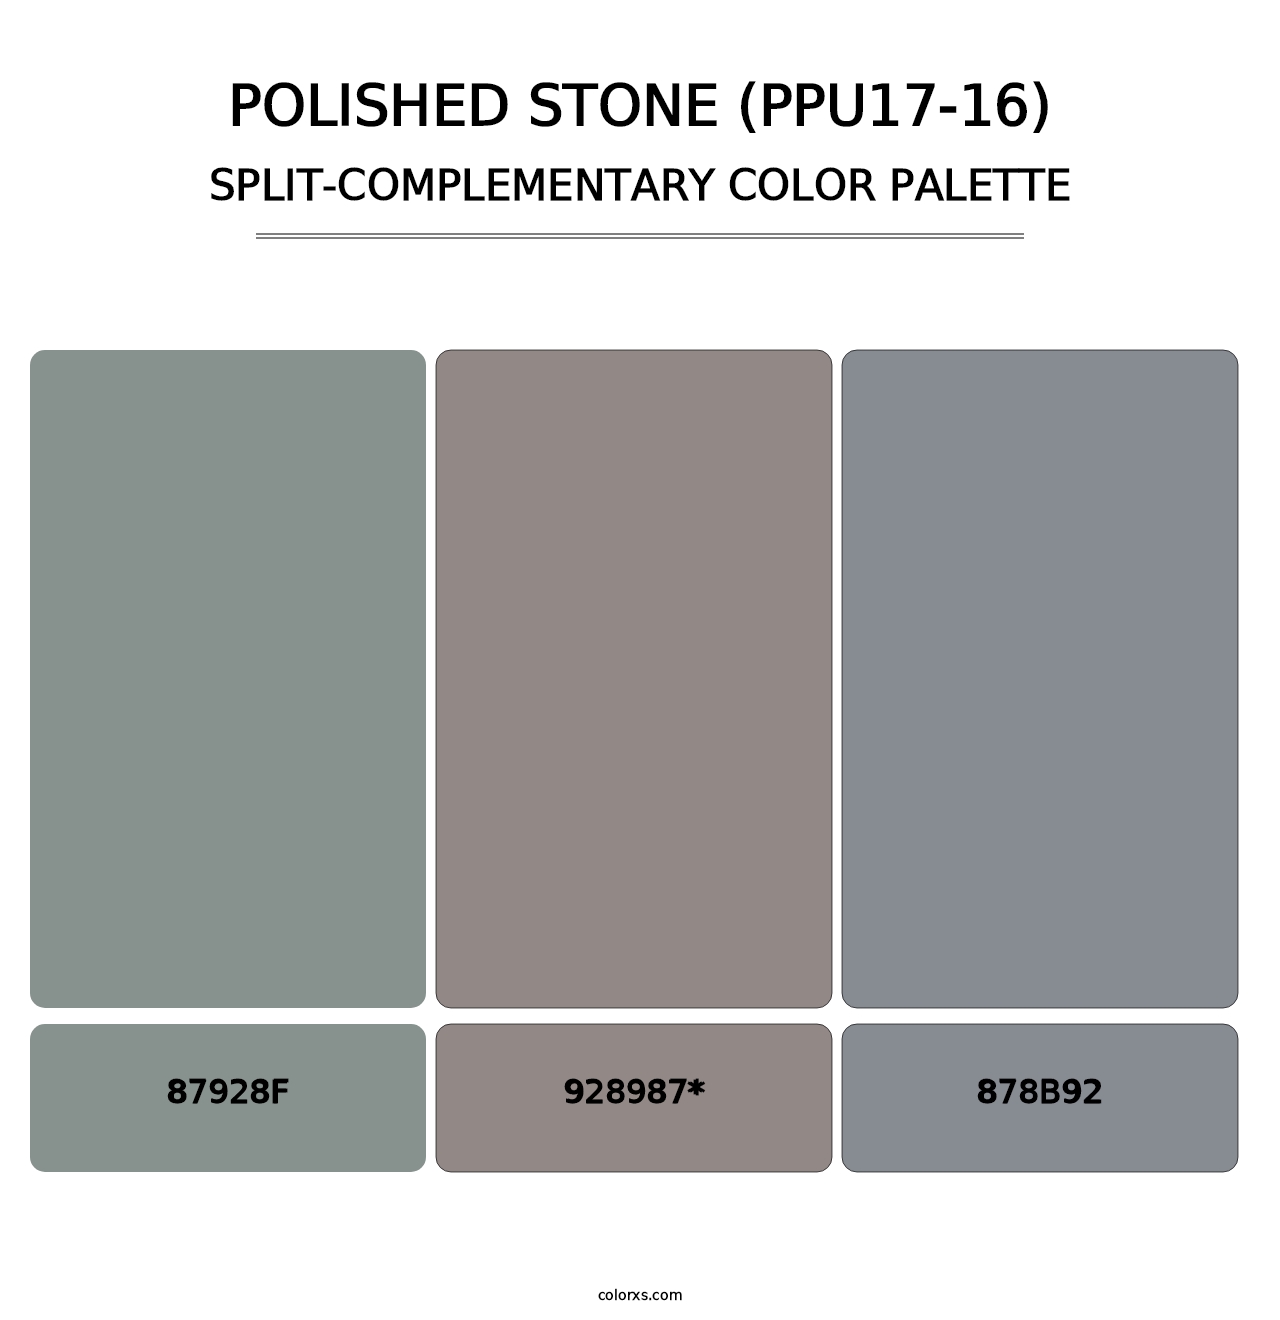 Polished Stone (PPU17-16) - Split-Complementary Color Palette